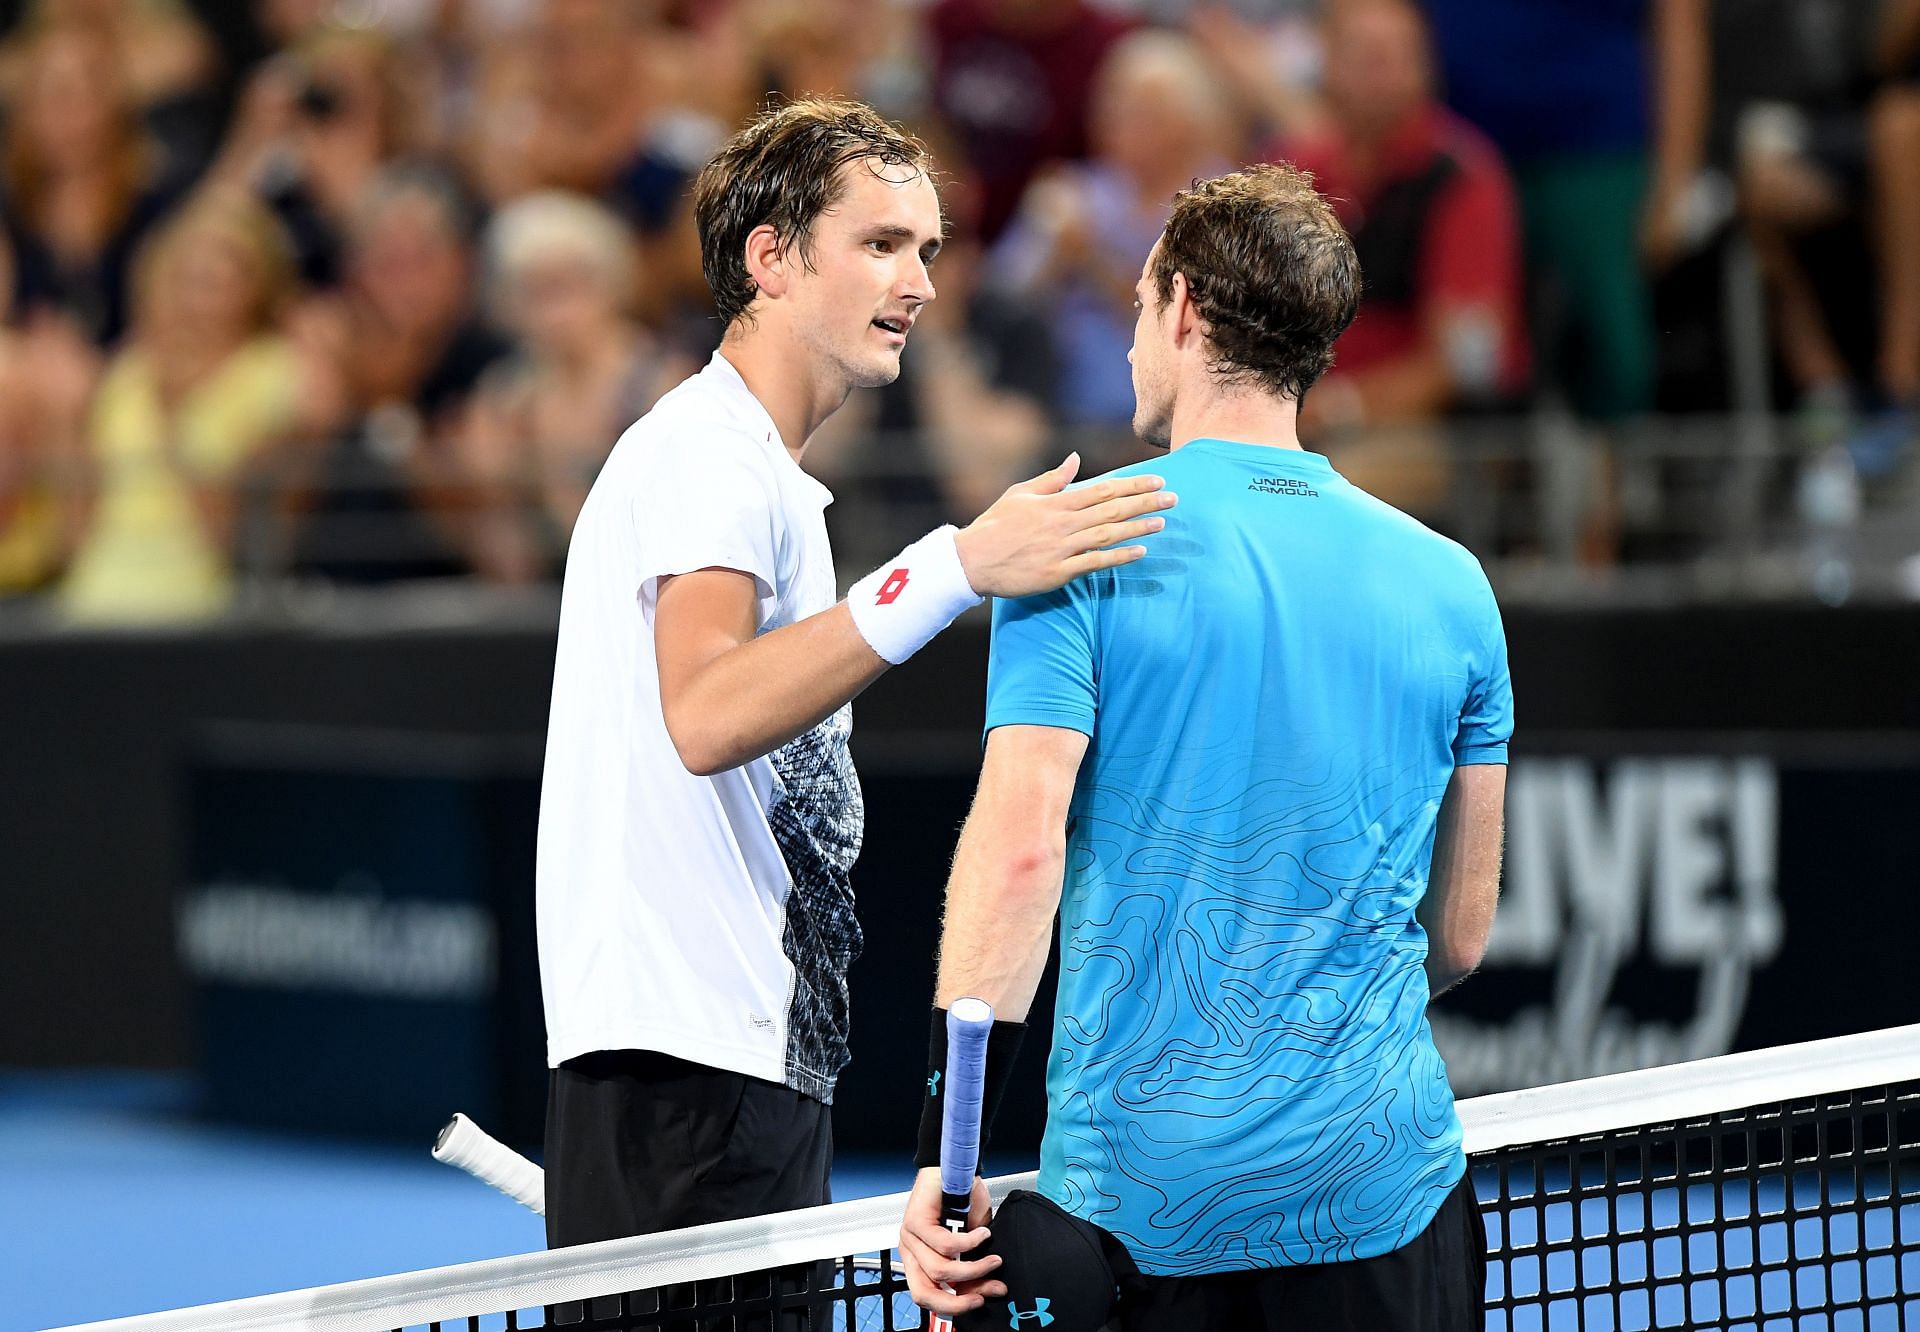 Daniil Medvedev and Andy Murray after their match at the 2019 Brisbane International